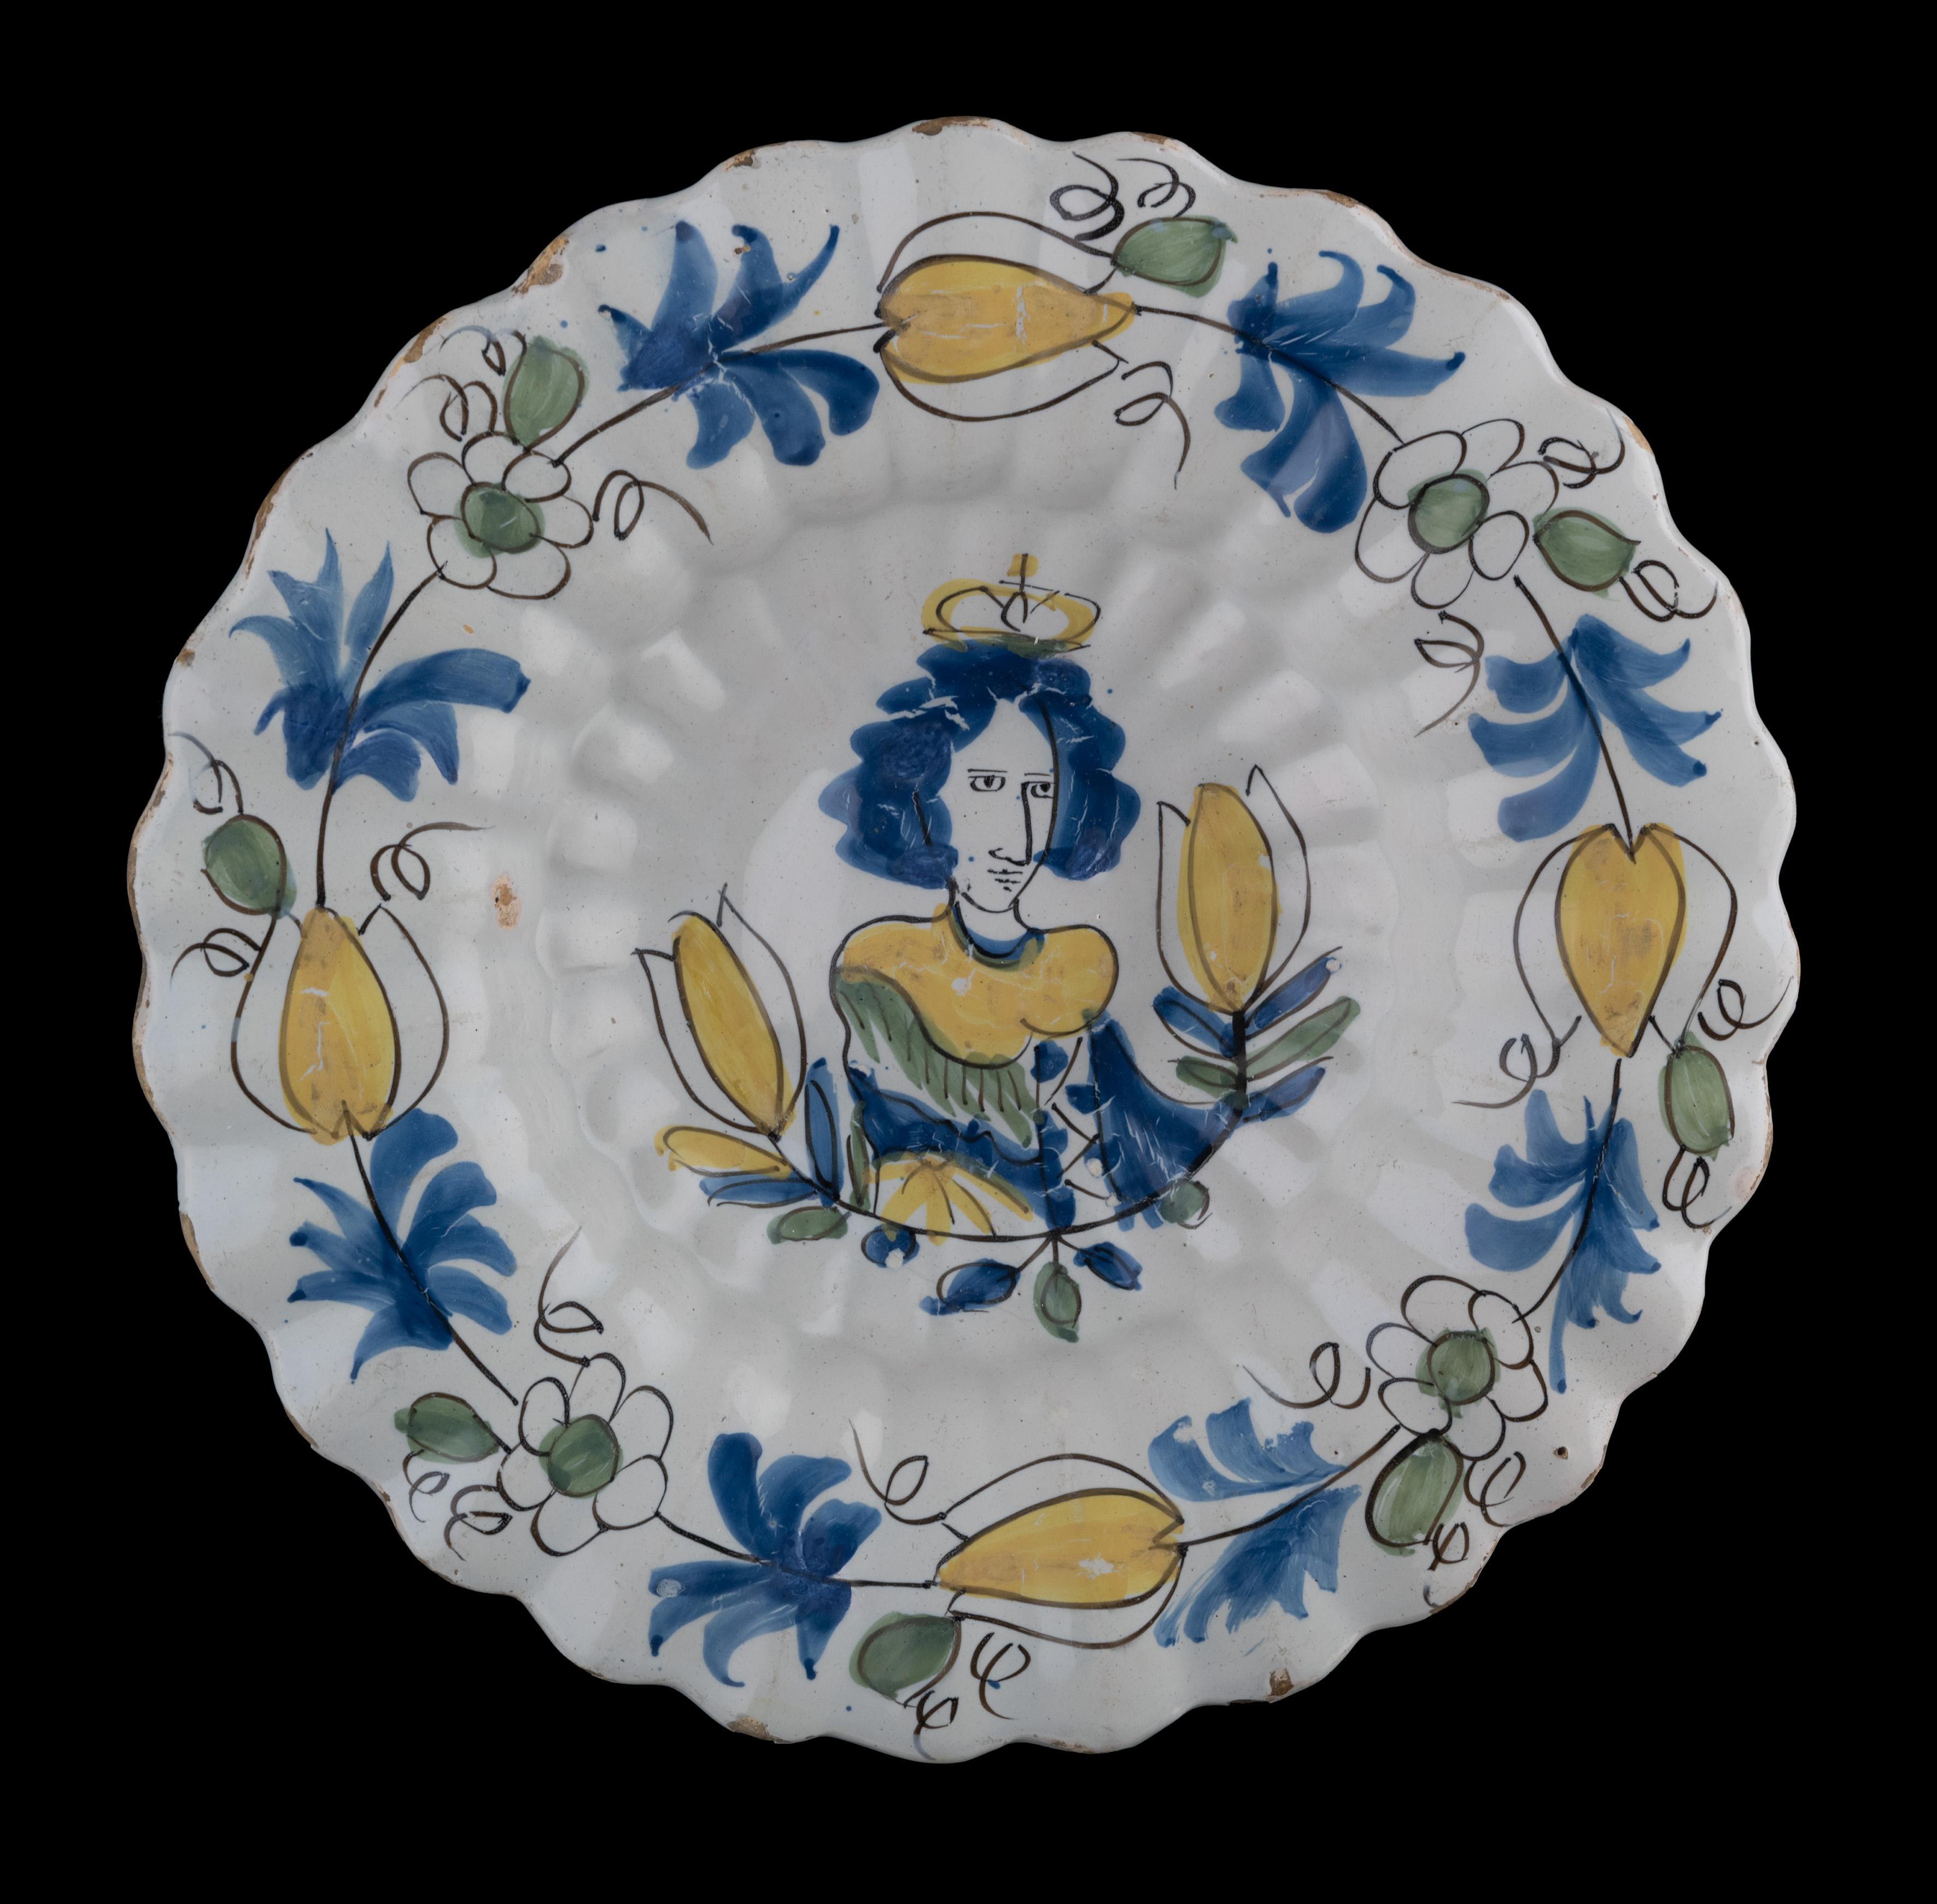 Polychrome lobed dish with Queen Mary II Stuart
Delft, circa 1690 

The polychrome lobed dish is composed of twenty-seven double lobes and painted in blue, green and yellow with a depiction of Queen Mary II Stuart between two tulips. The border is